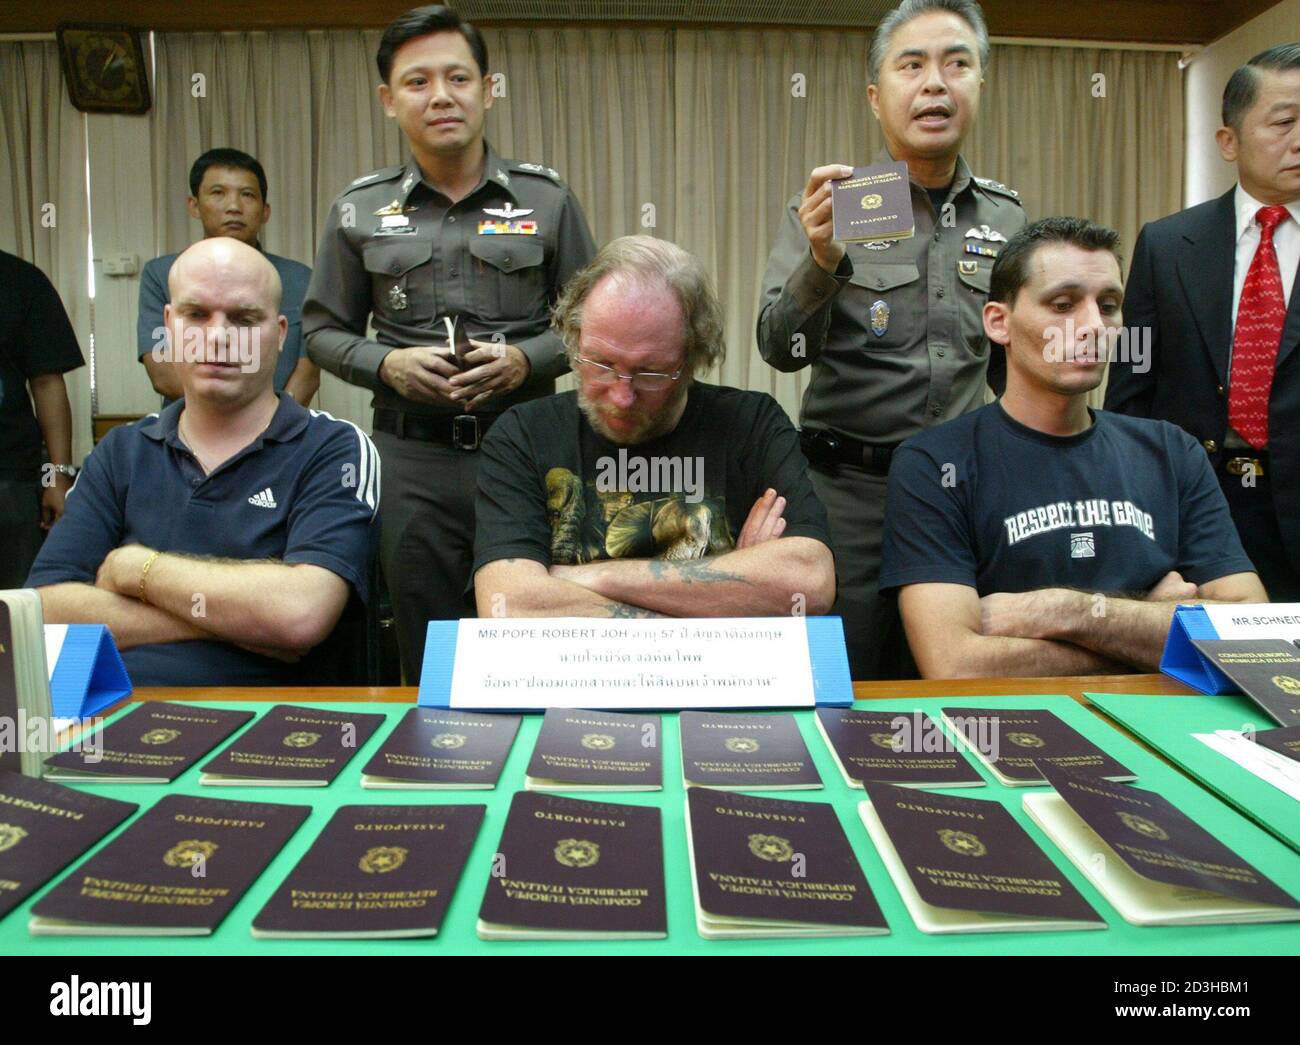 Fake Police Thailand High Resolution Stock Photography and Images - Alamy